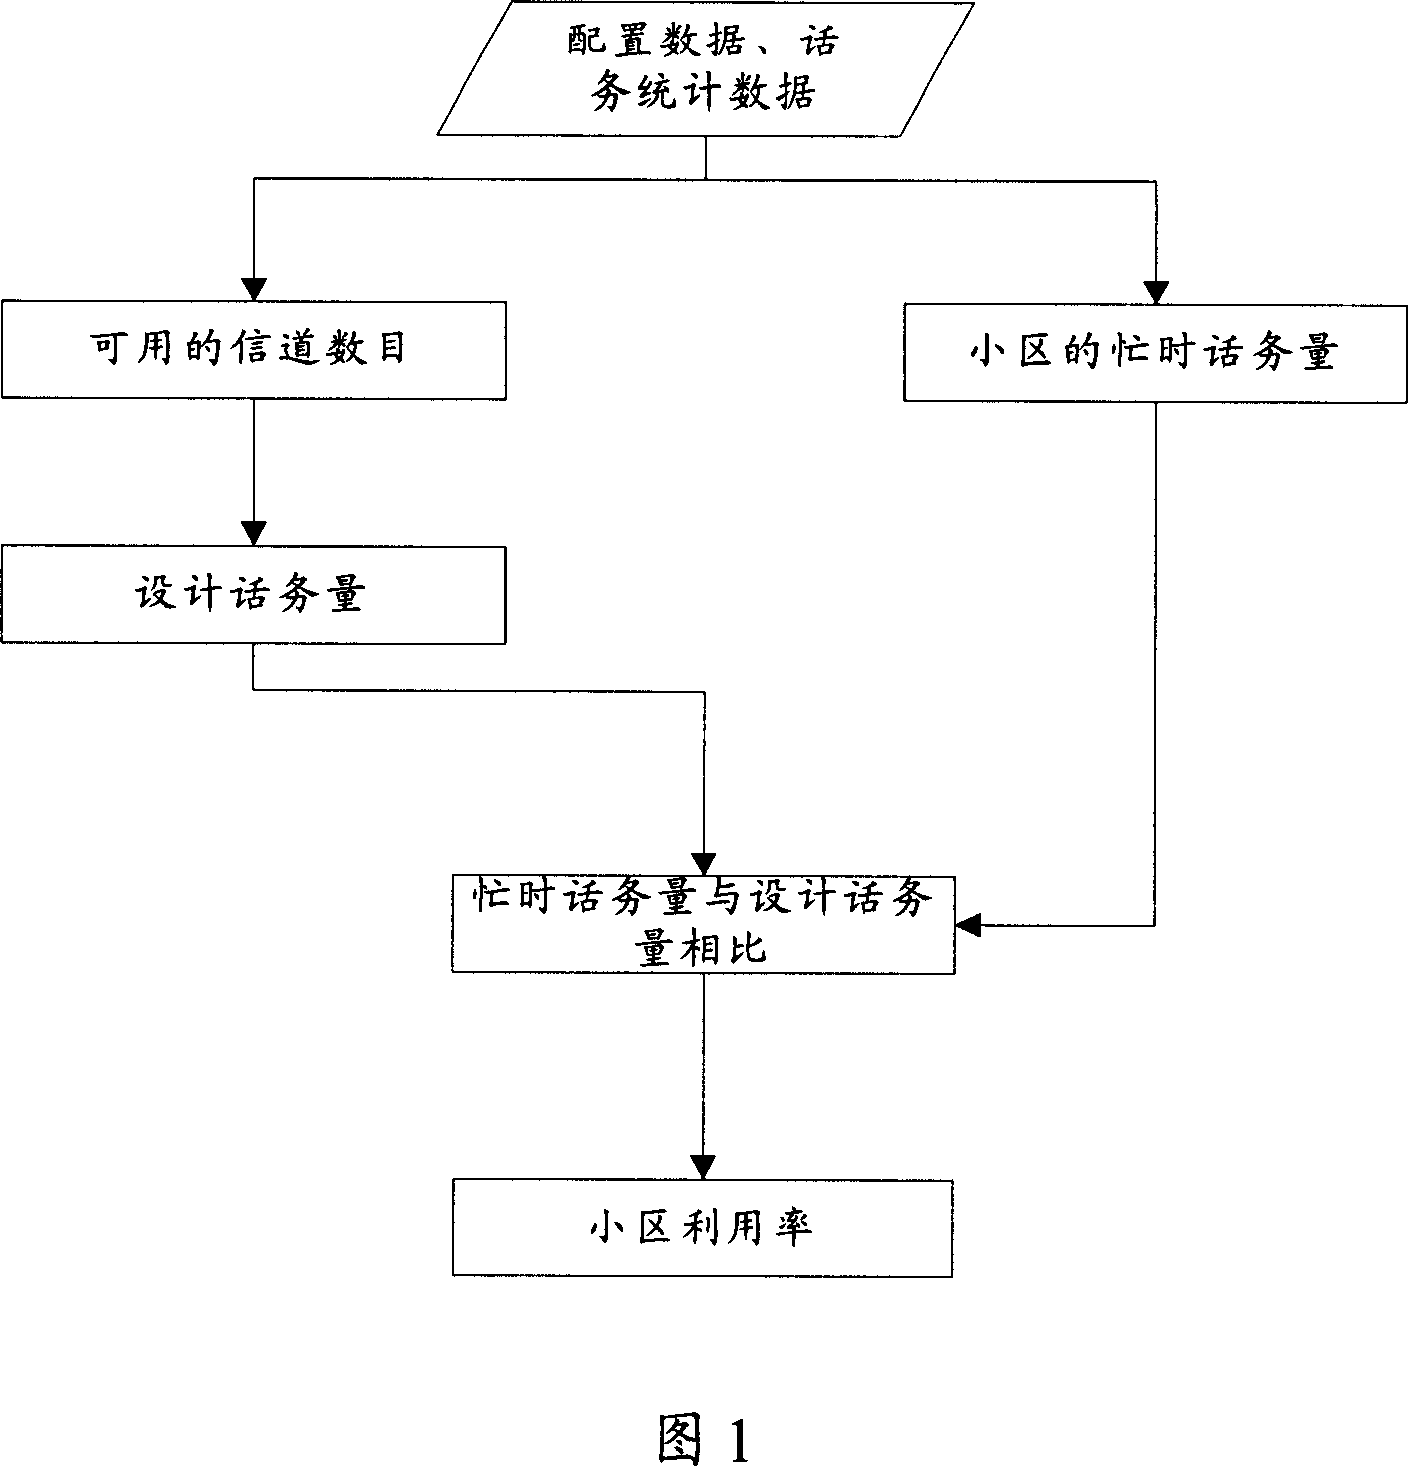 Method and system for adjusting wireless network resource